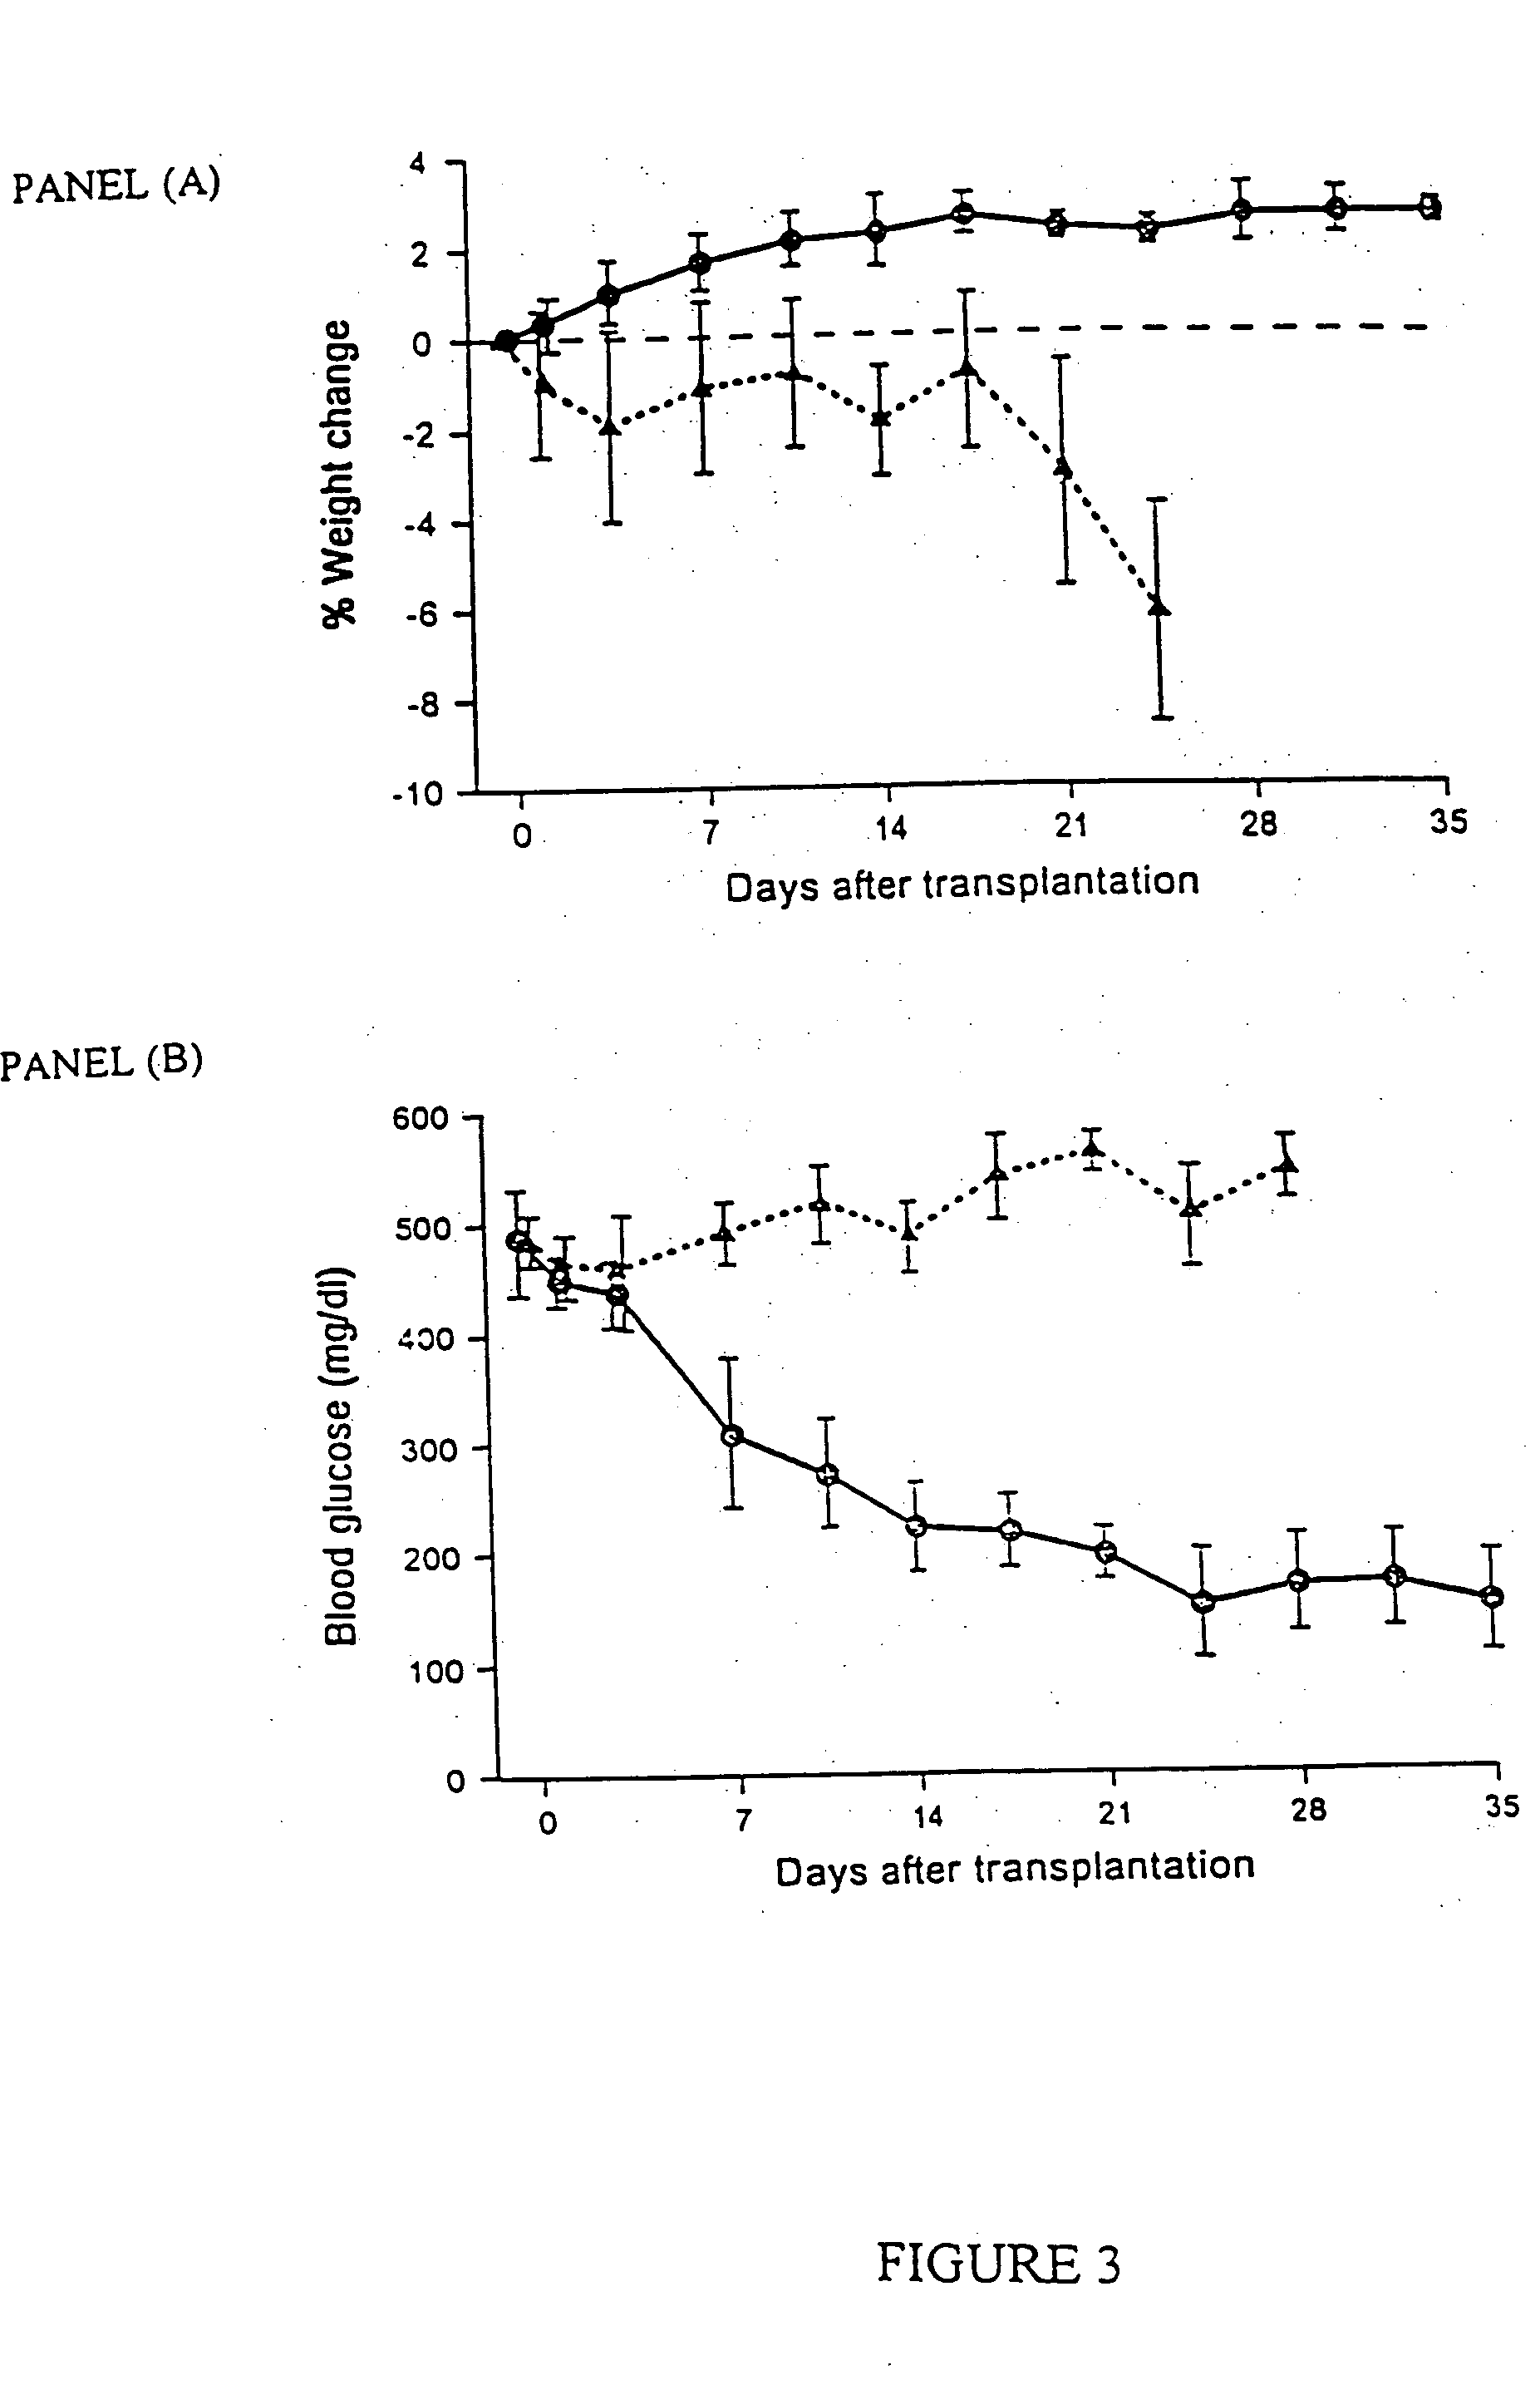 Immunologically privileged cells and uses thereof